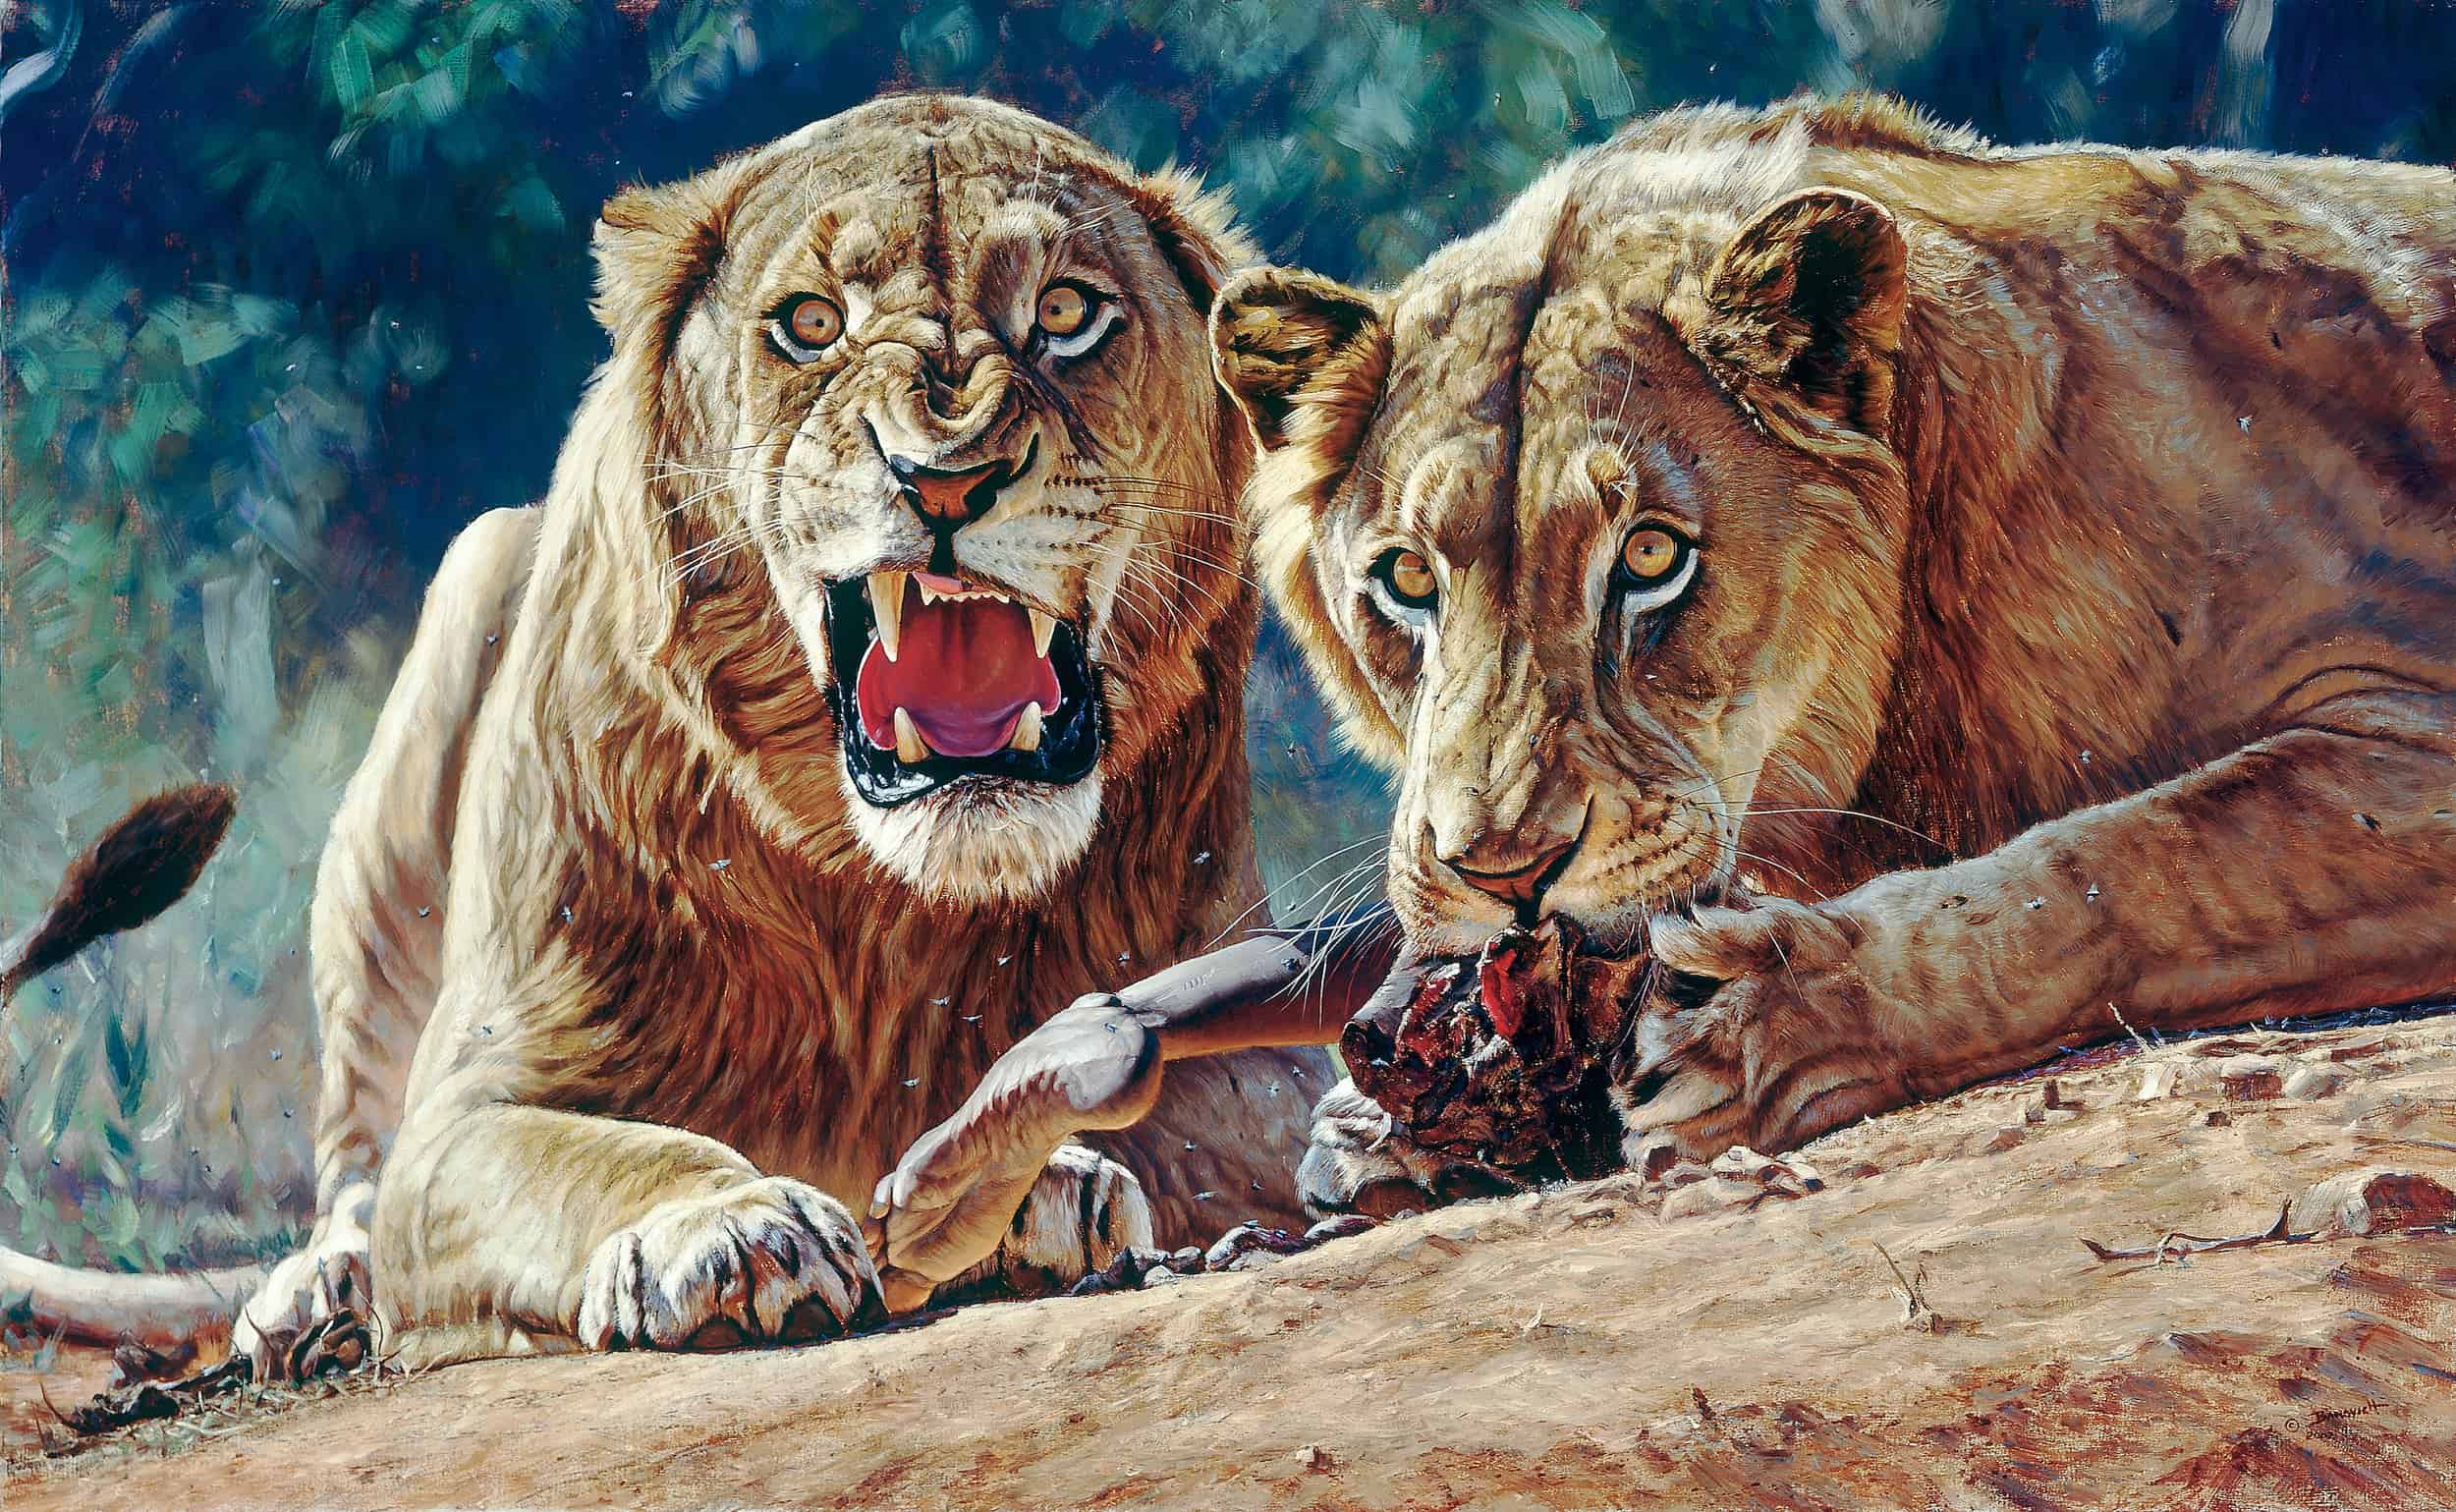 Painting by John Banovich of two lions eating meat, one snarling at viewer